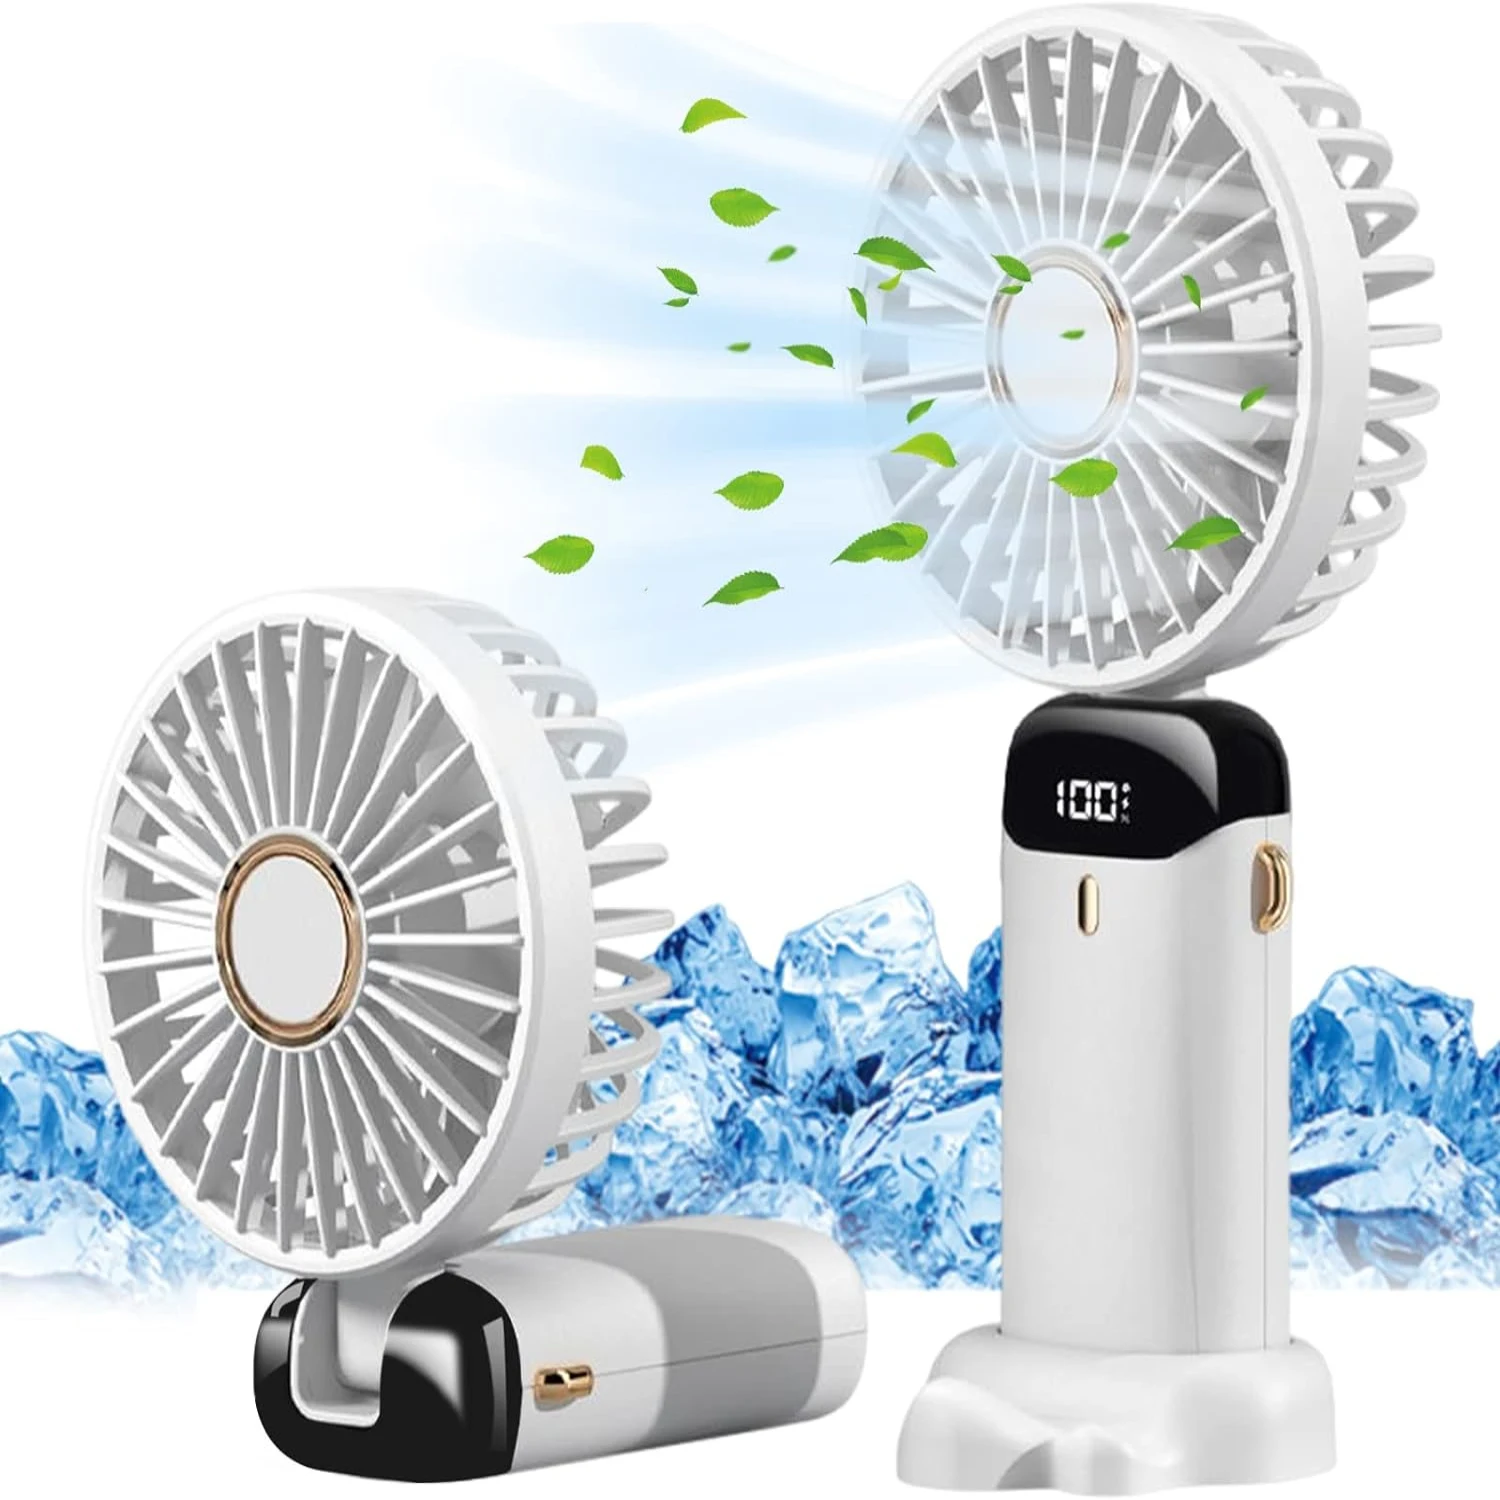 

Handheld Fan Mini Fan Portable with LED Display, Type-C Rechargeable with Lanyard and Base